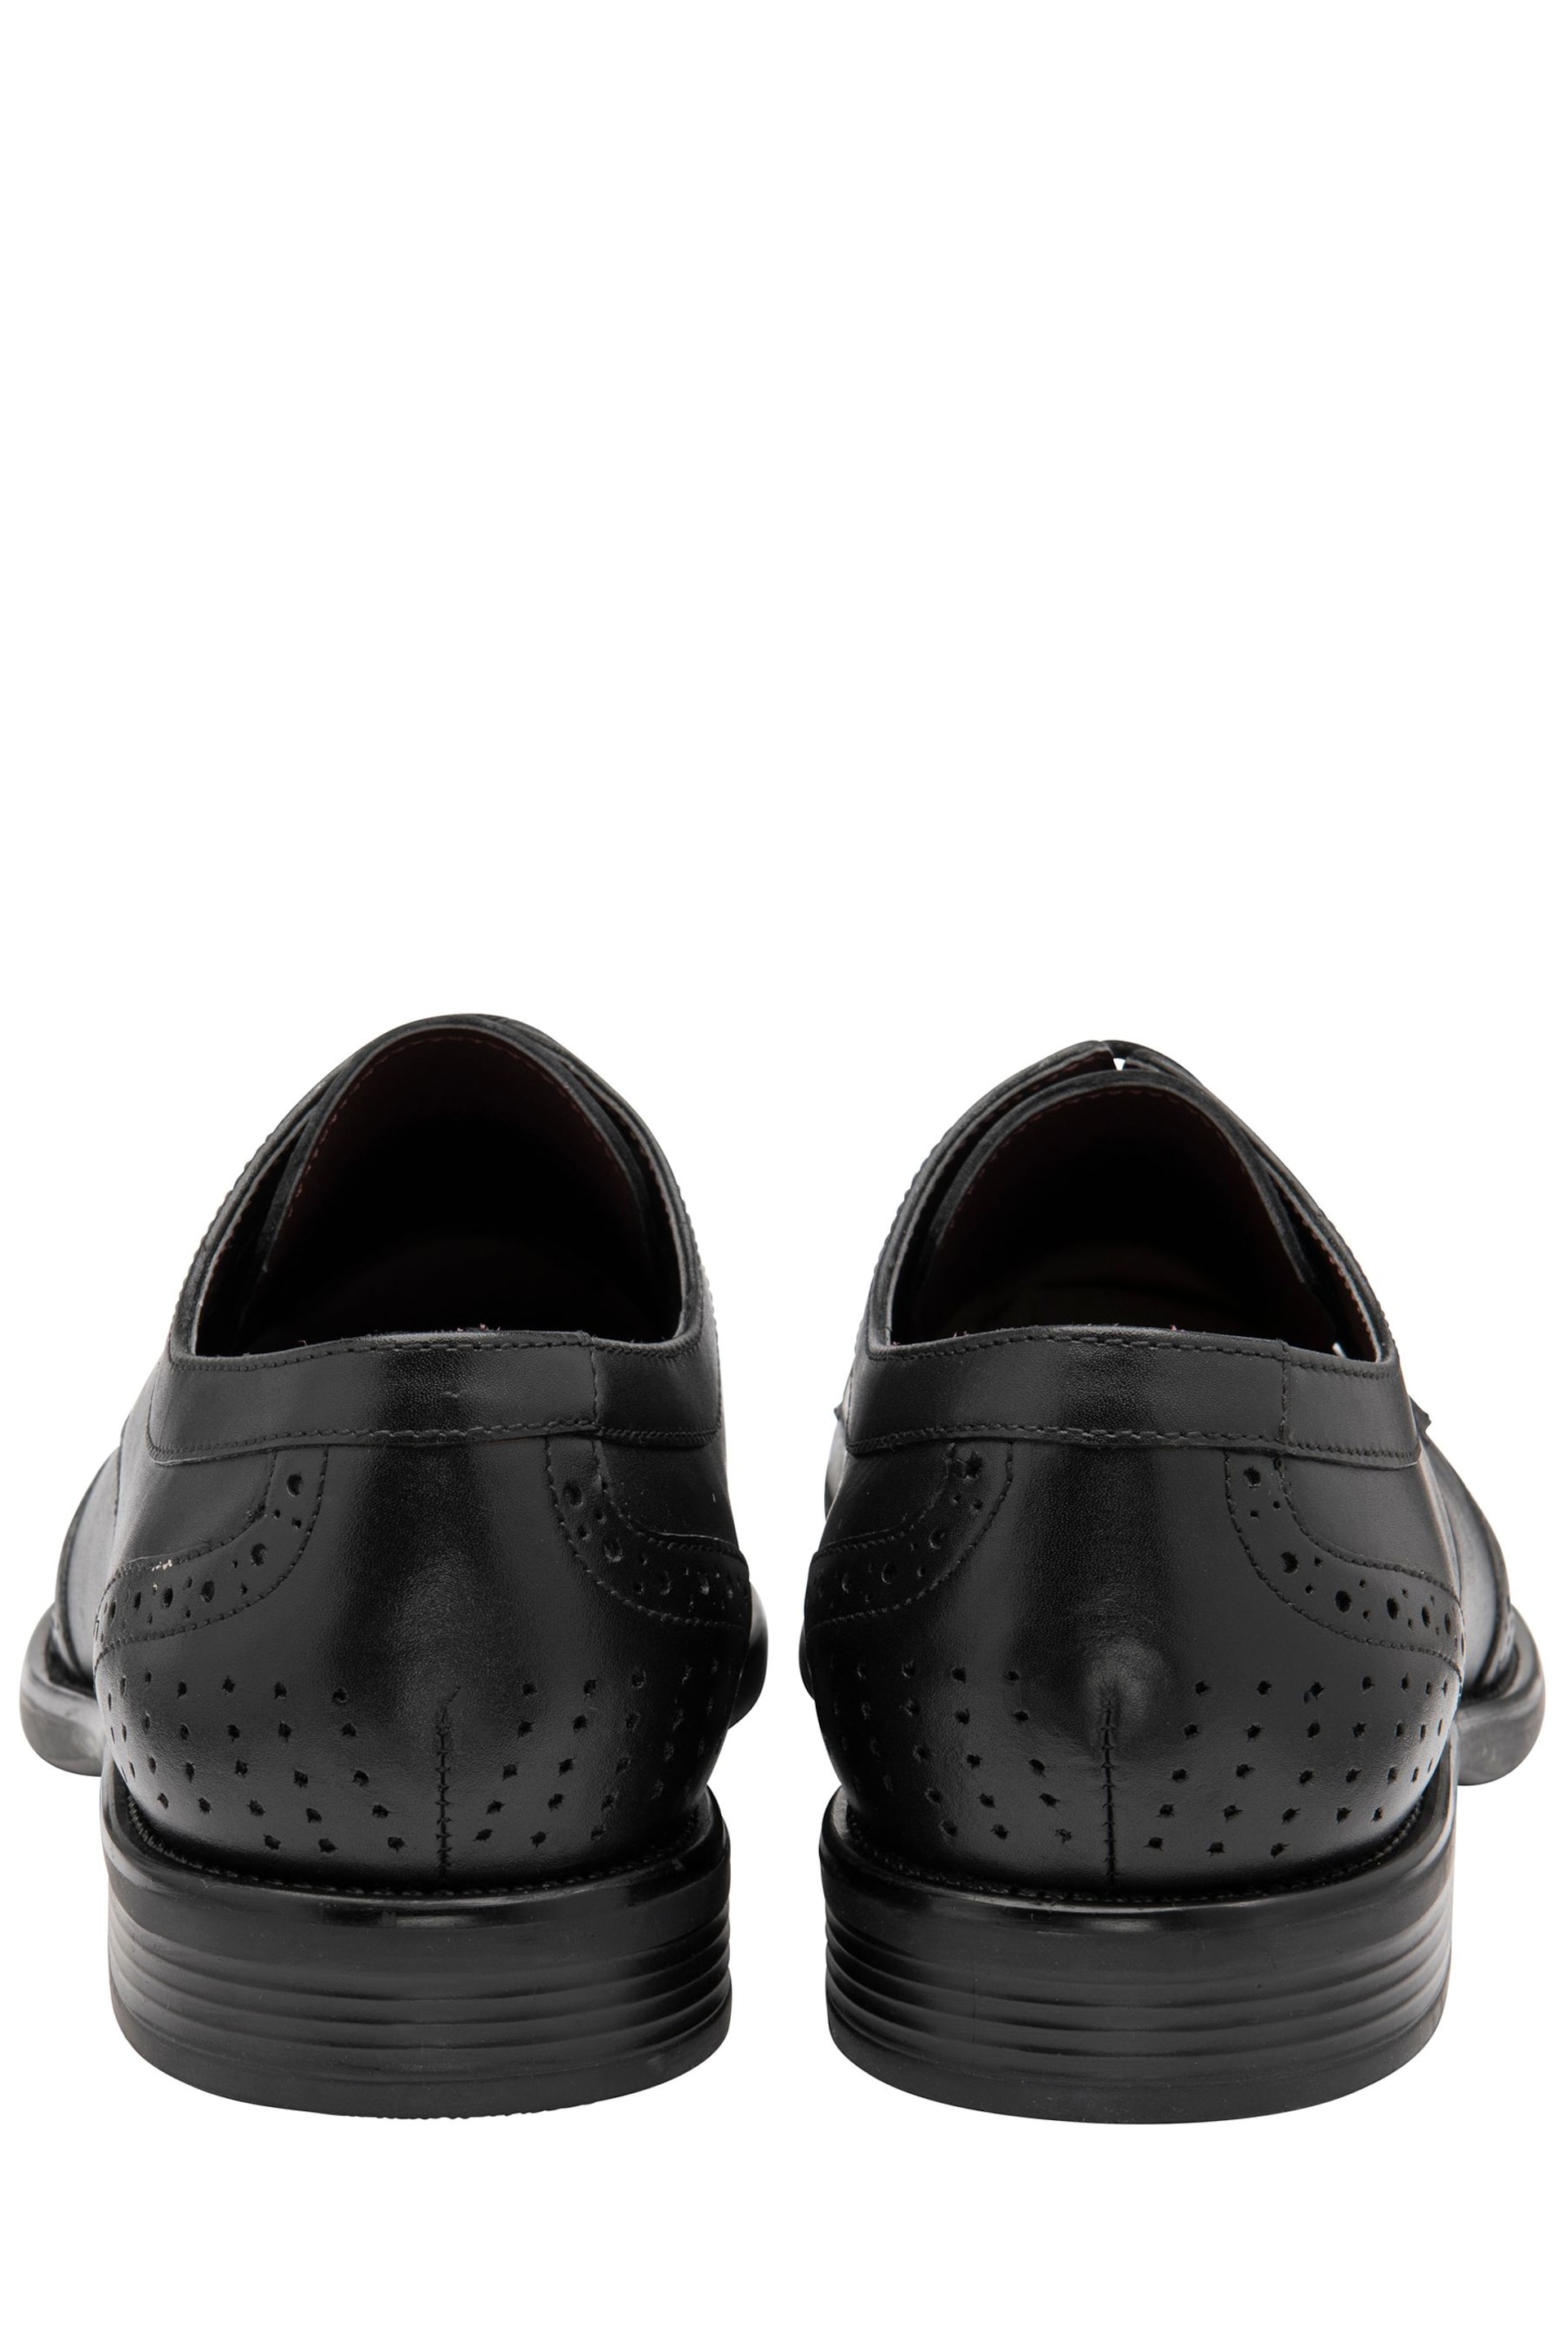 Lotus Black Leather Lace-Up Brogues - Image 3 of 4